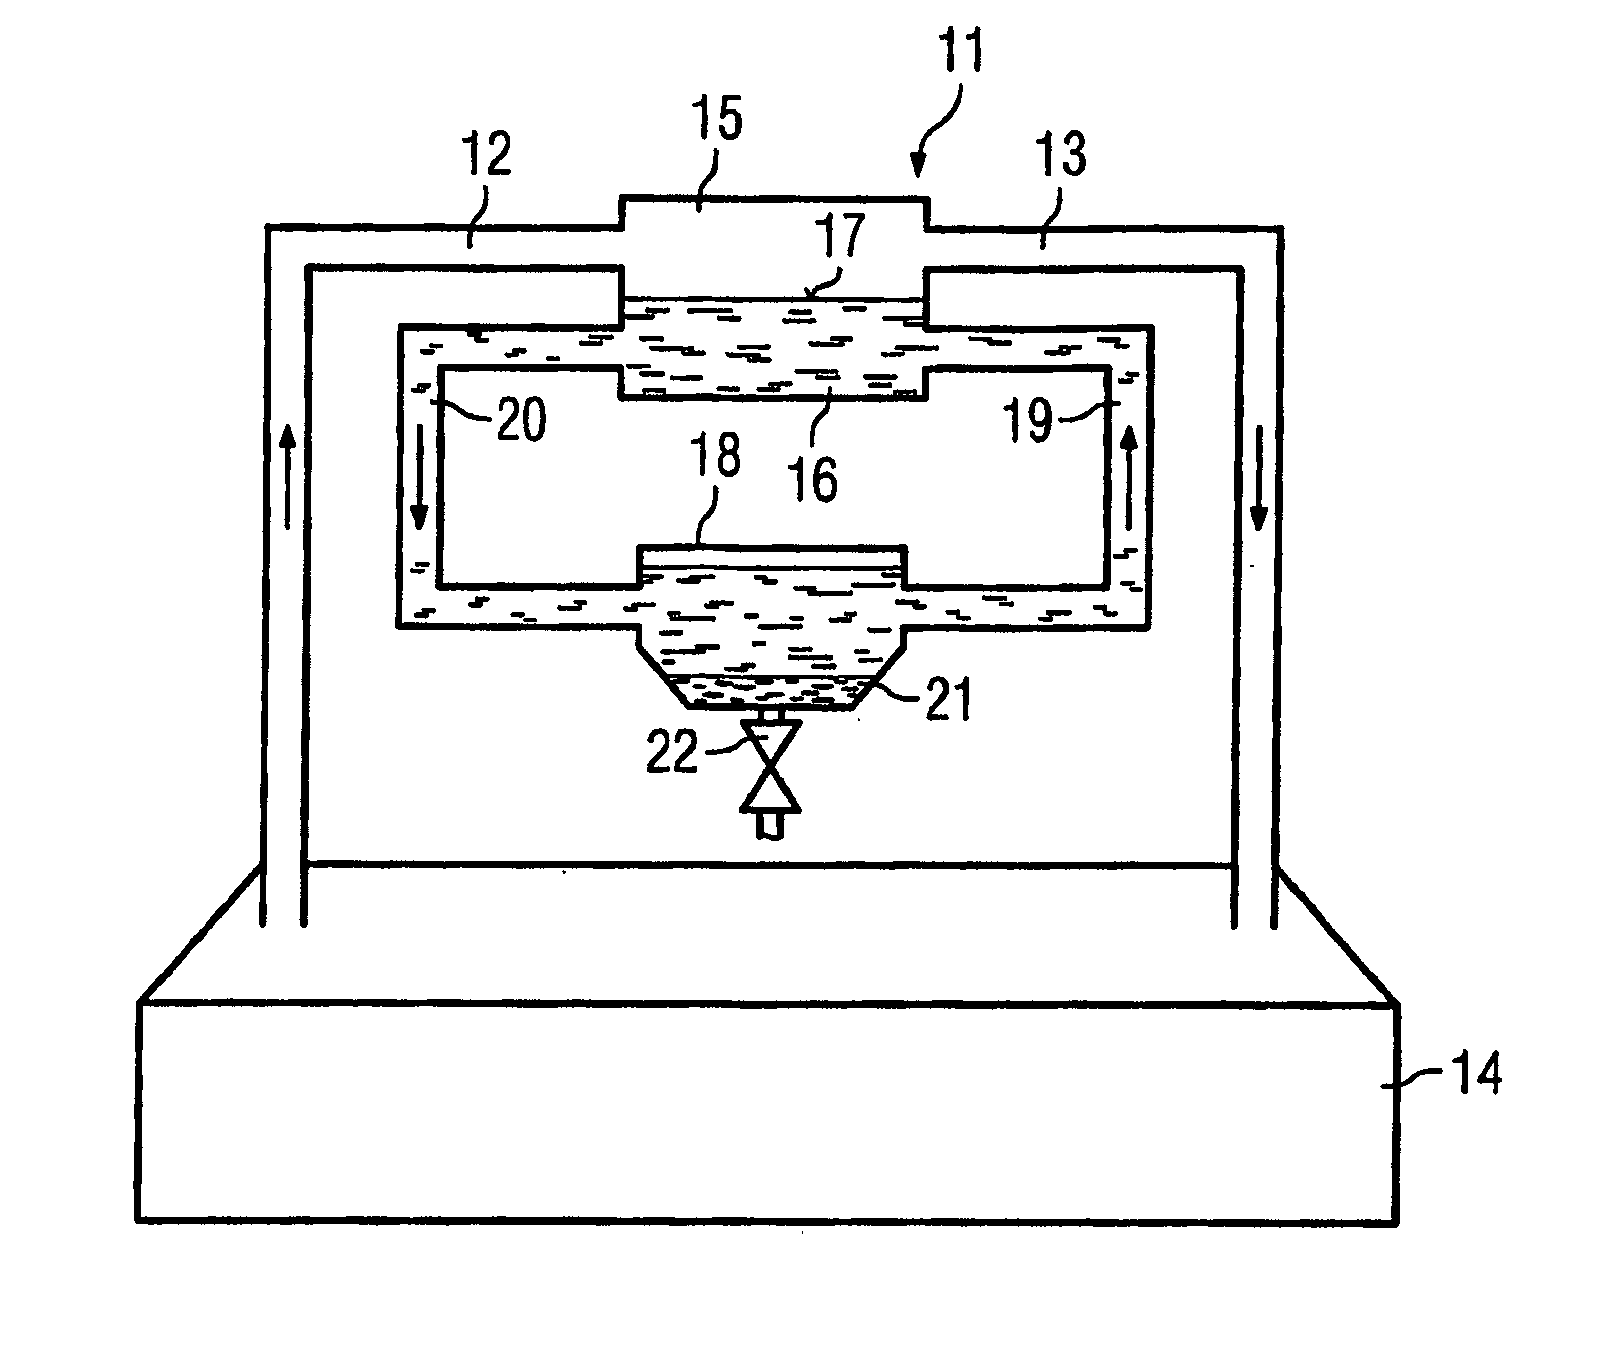 Vapor-operated soldering system and vapor generation system for a soldering system